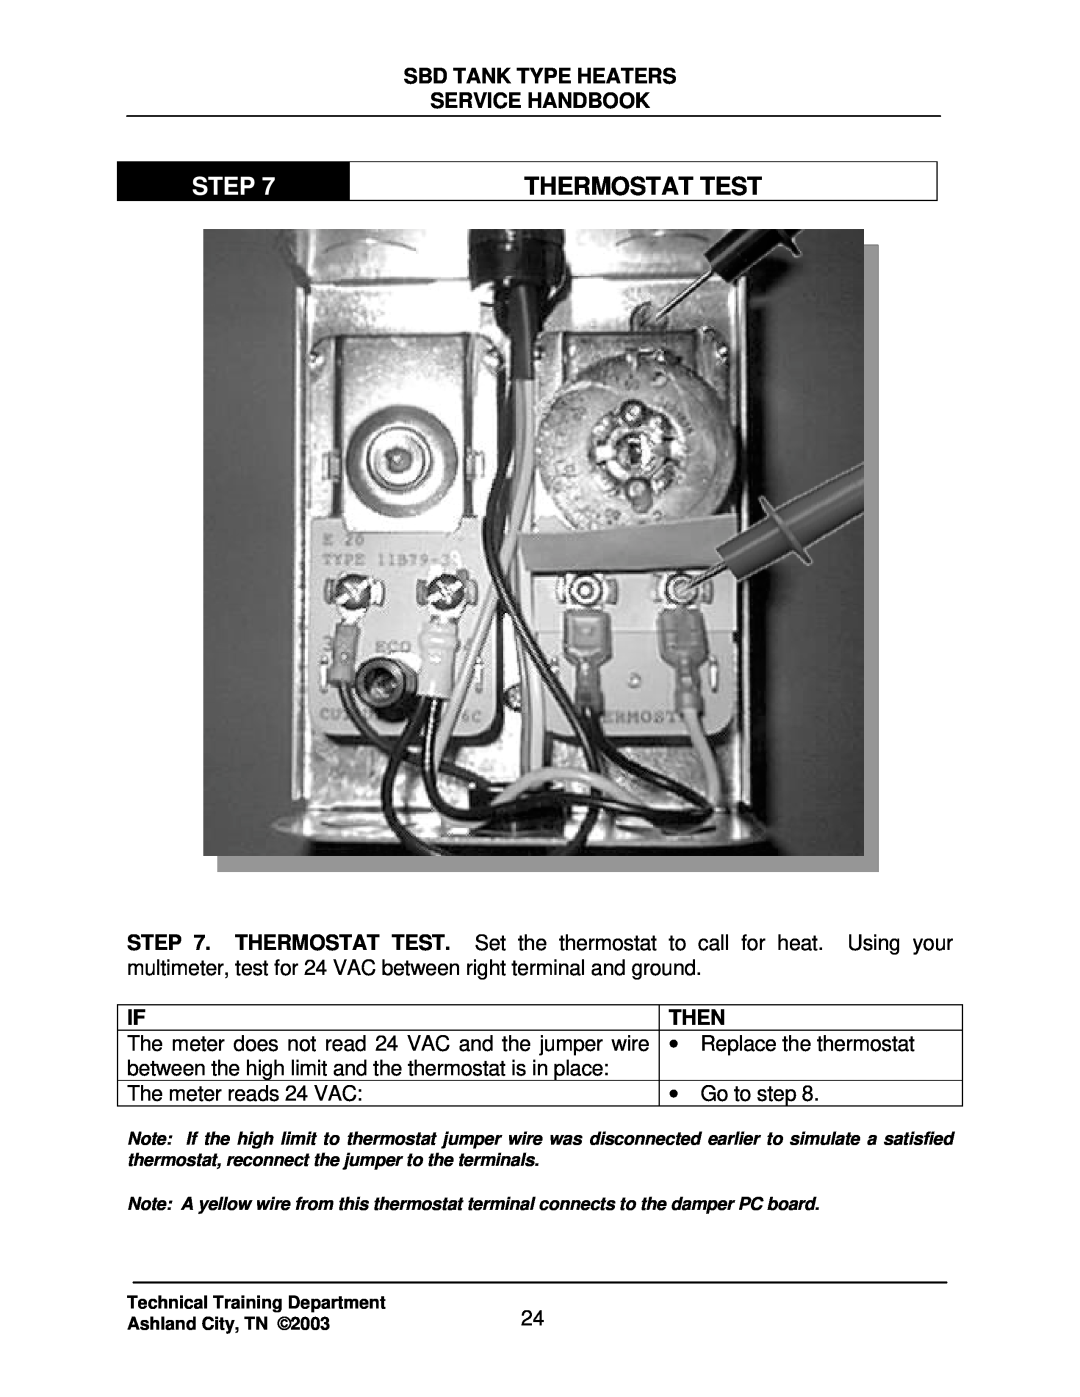 State Industries SBD71 120, SBD85 500 manual Thermostat Test, Step, Sbd Tank Type Heaters Service Handbook, Then 